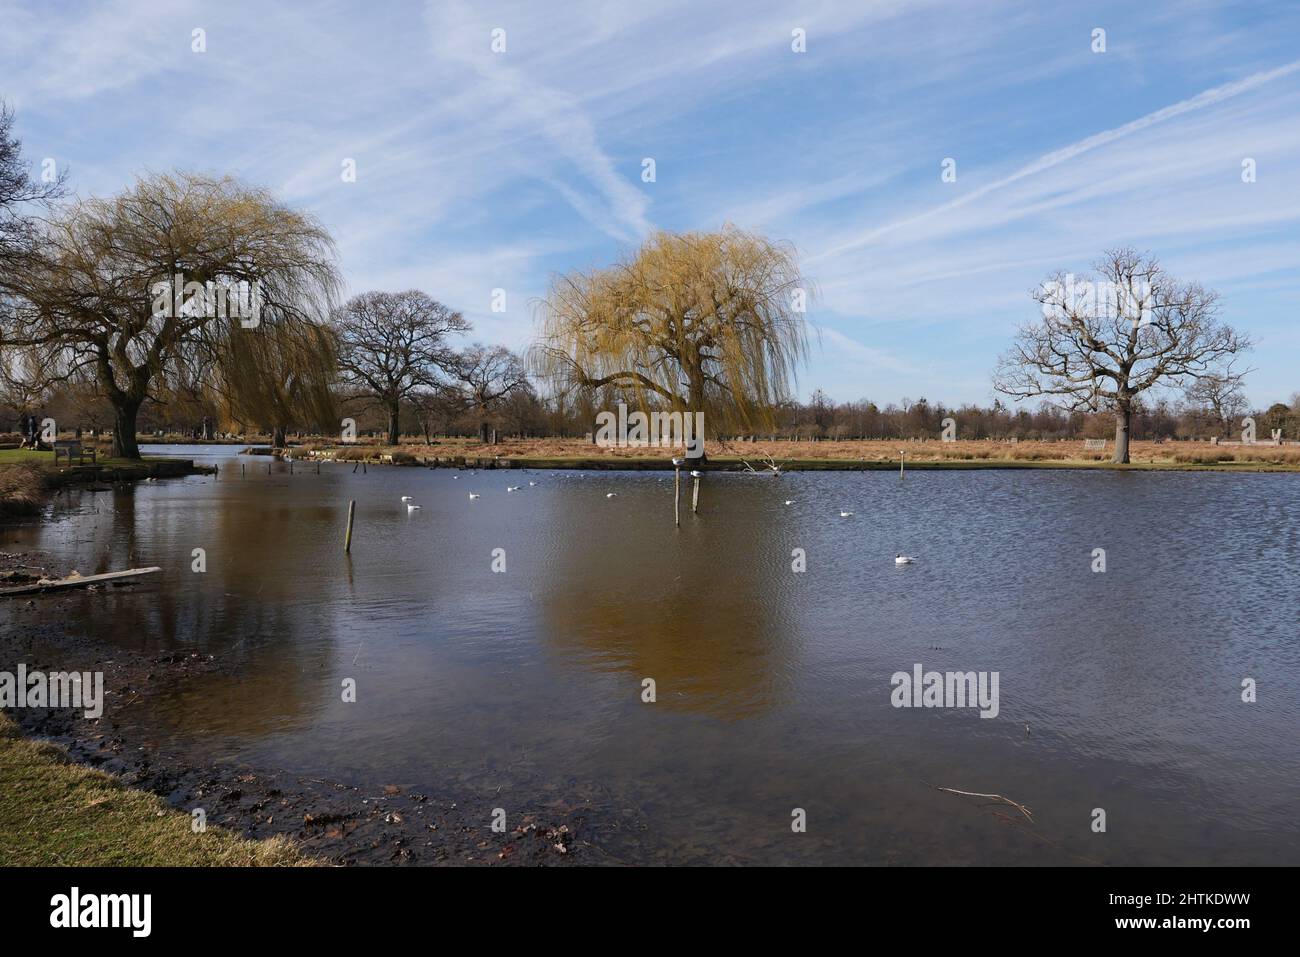 Bushy Park’s landscape is a patchwork quilt of English history spanning a millennium: you can see the remains of medieval farming systems, the legacy of a Tudor deer park, 17th century water gardens and decorative features representing the height of neoclassical taste, and traces of military camps that played remarkable roles in the World Wars. Stock Photo